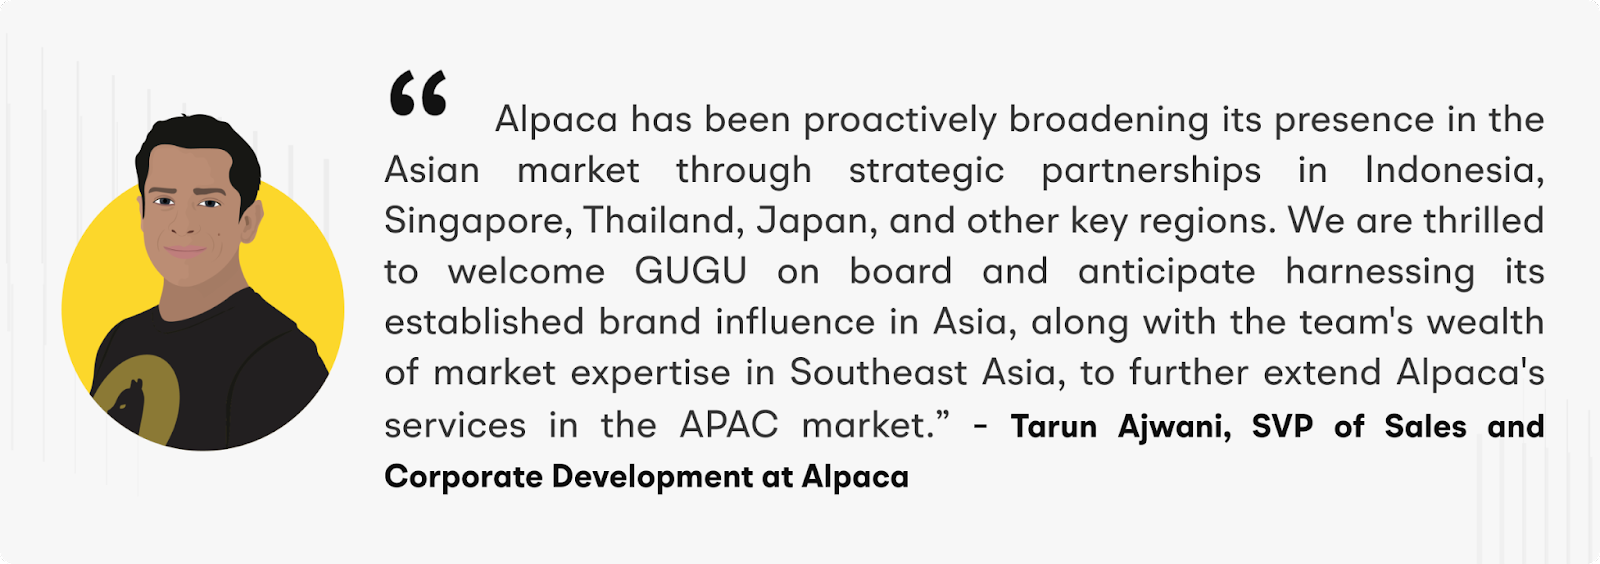 “Alpaca has been proactively broadening its presence in the Asian market through strategic partnerships in Indonesia, Singapore, Thailand, Japan, and other key regions. We are thrilled to welcome GUGU on board and anticipate harnessing its established brand influence in Asia, along with the team's wealth of market expertise in Southeast Asia, to further extend Alpaca's services in the APAC market.” –  Tarun Ajwani, SVP of Sales and Corporate Development at Alpaca